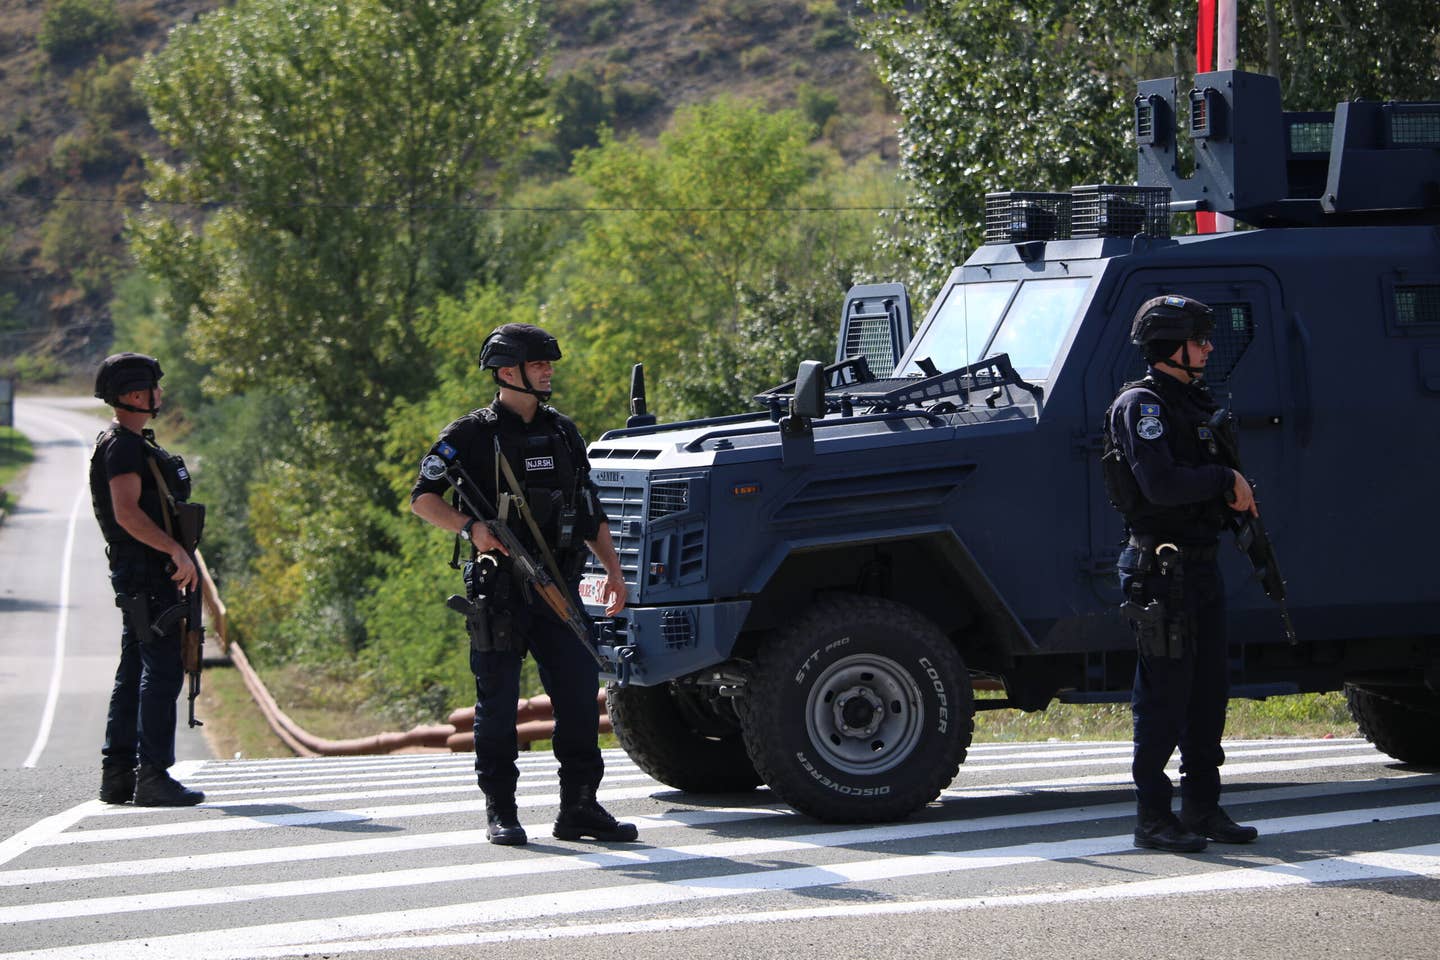 September 30, 2023: Kosovo police officers and members of the NATO Peacekeeping Force in Kosovo (KFOR) conduct search, patrol, and control activities in the region after the violence in Banjska in the north of the country on September 24. <em>Photo by Erkin Keci/Anadolu Agency via Getty Images</em>